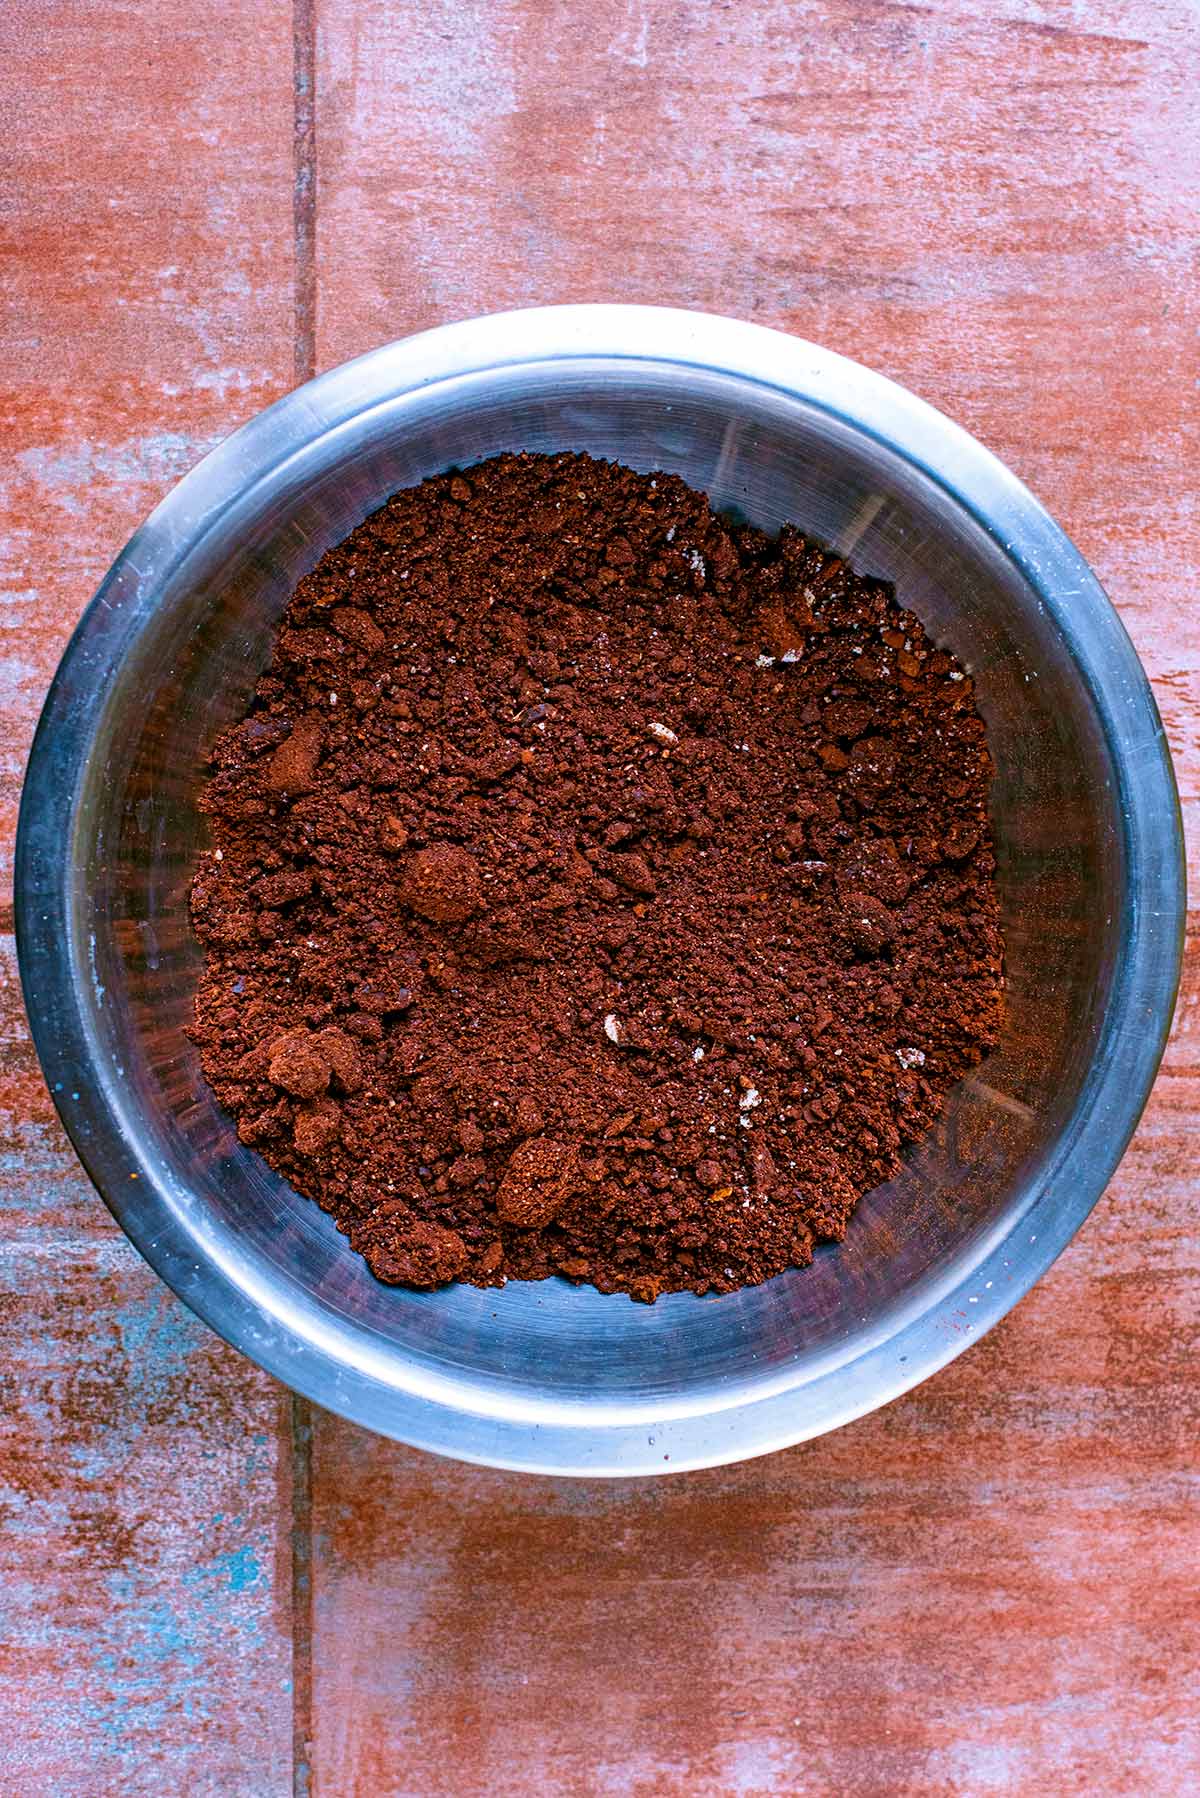 A metal mixing bowl full of ground almonds, chopped dates and cocoa powder.